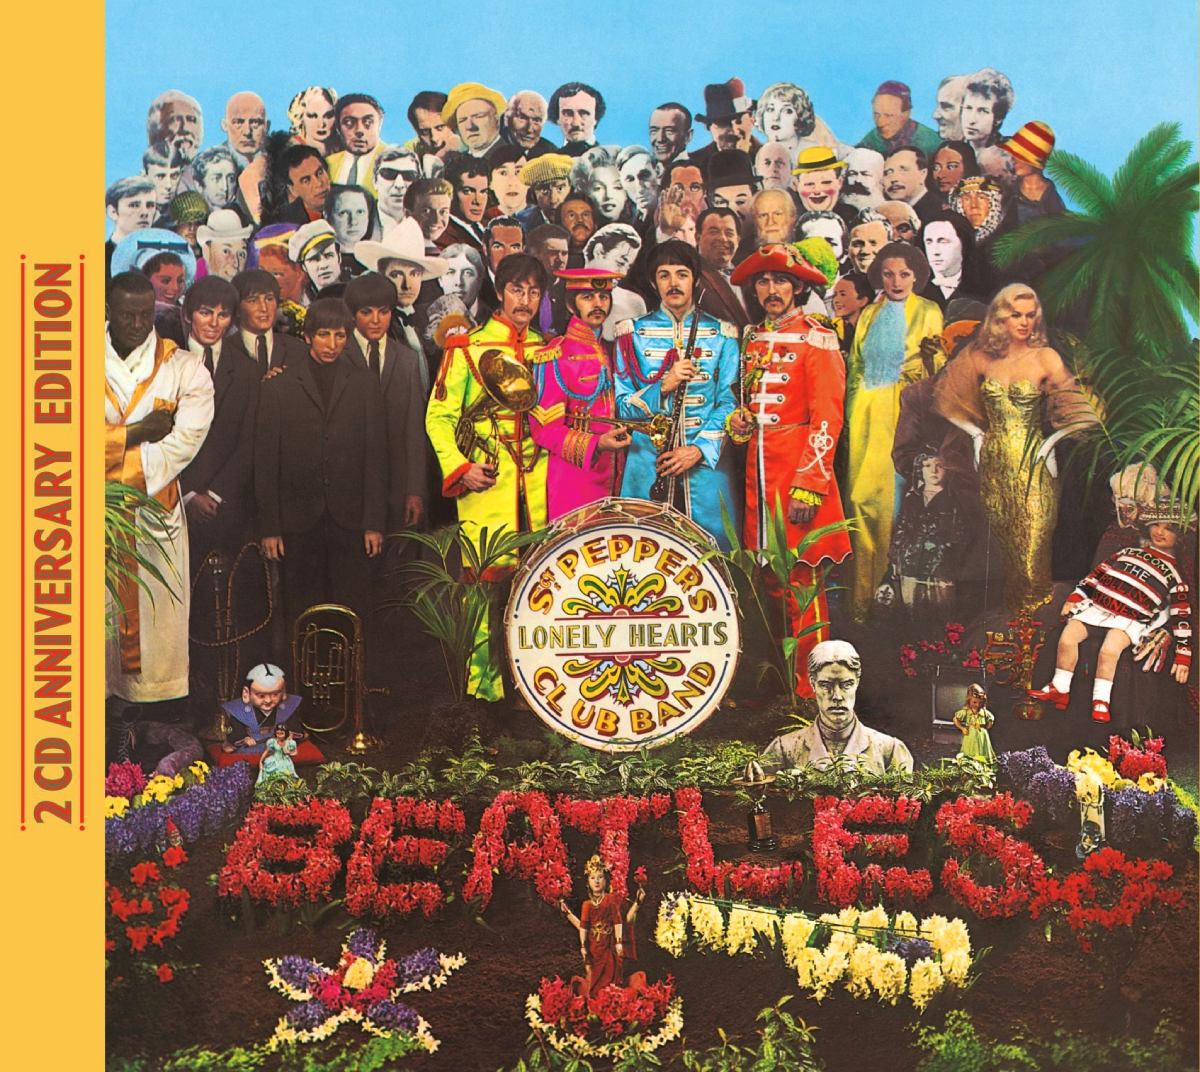 Sgt. Pepper's Lonely Hearts Club Band (álbum dos Beatles)